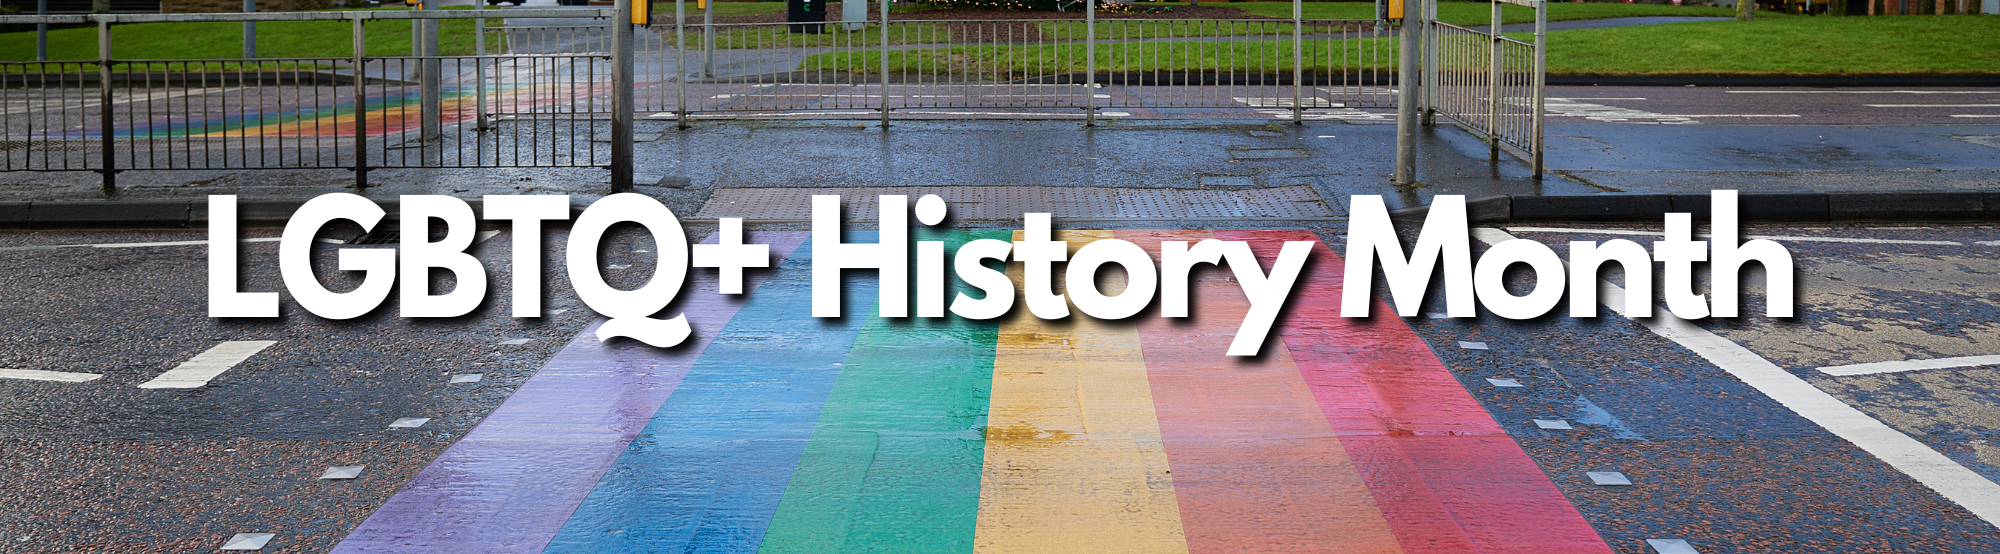 Image of a crosswalk painted in rainbow colors with the text LGBTW+ History Month